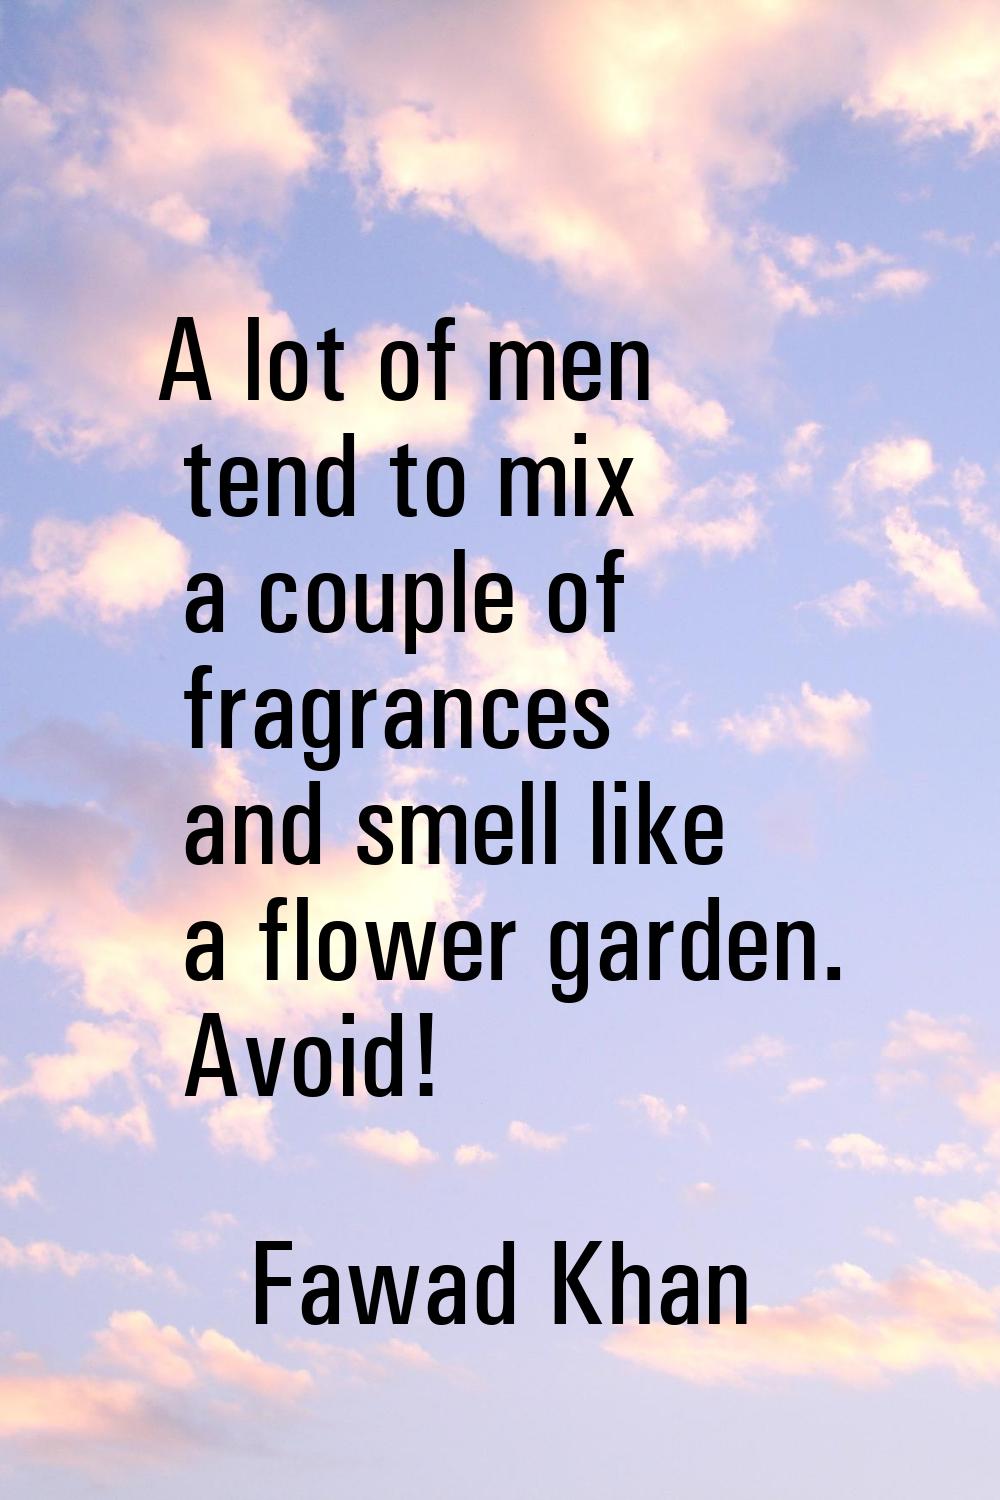 A lot of men tend to mix a couple of fragrances and smell like a flower garden. Avoid!